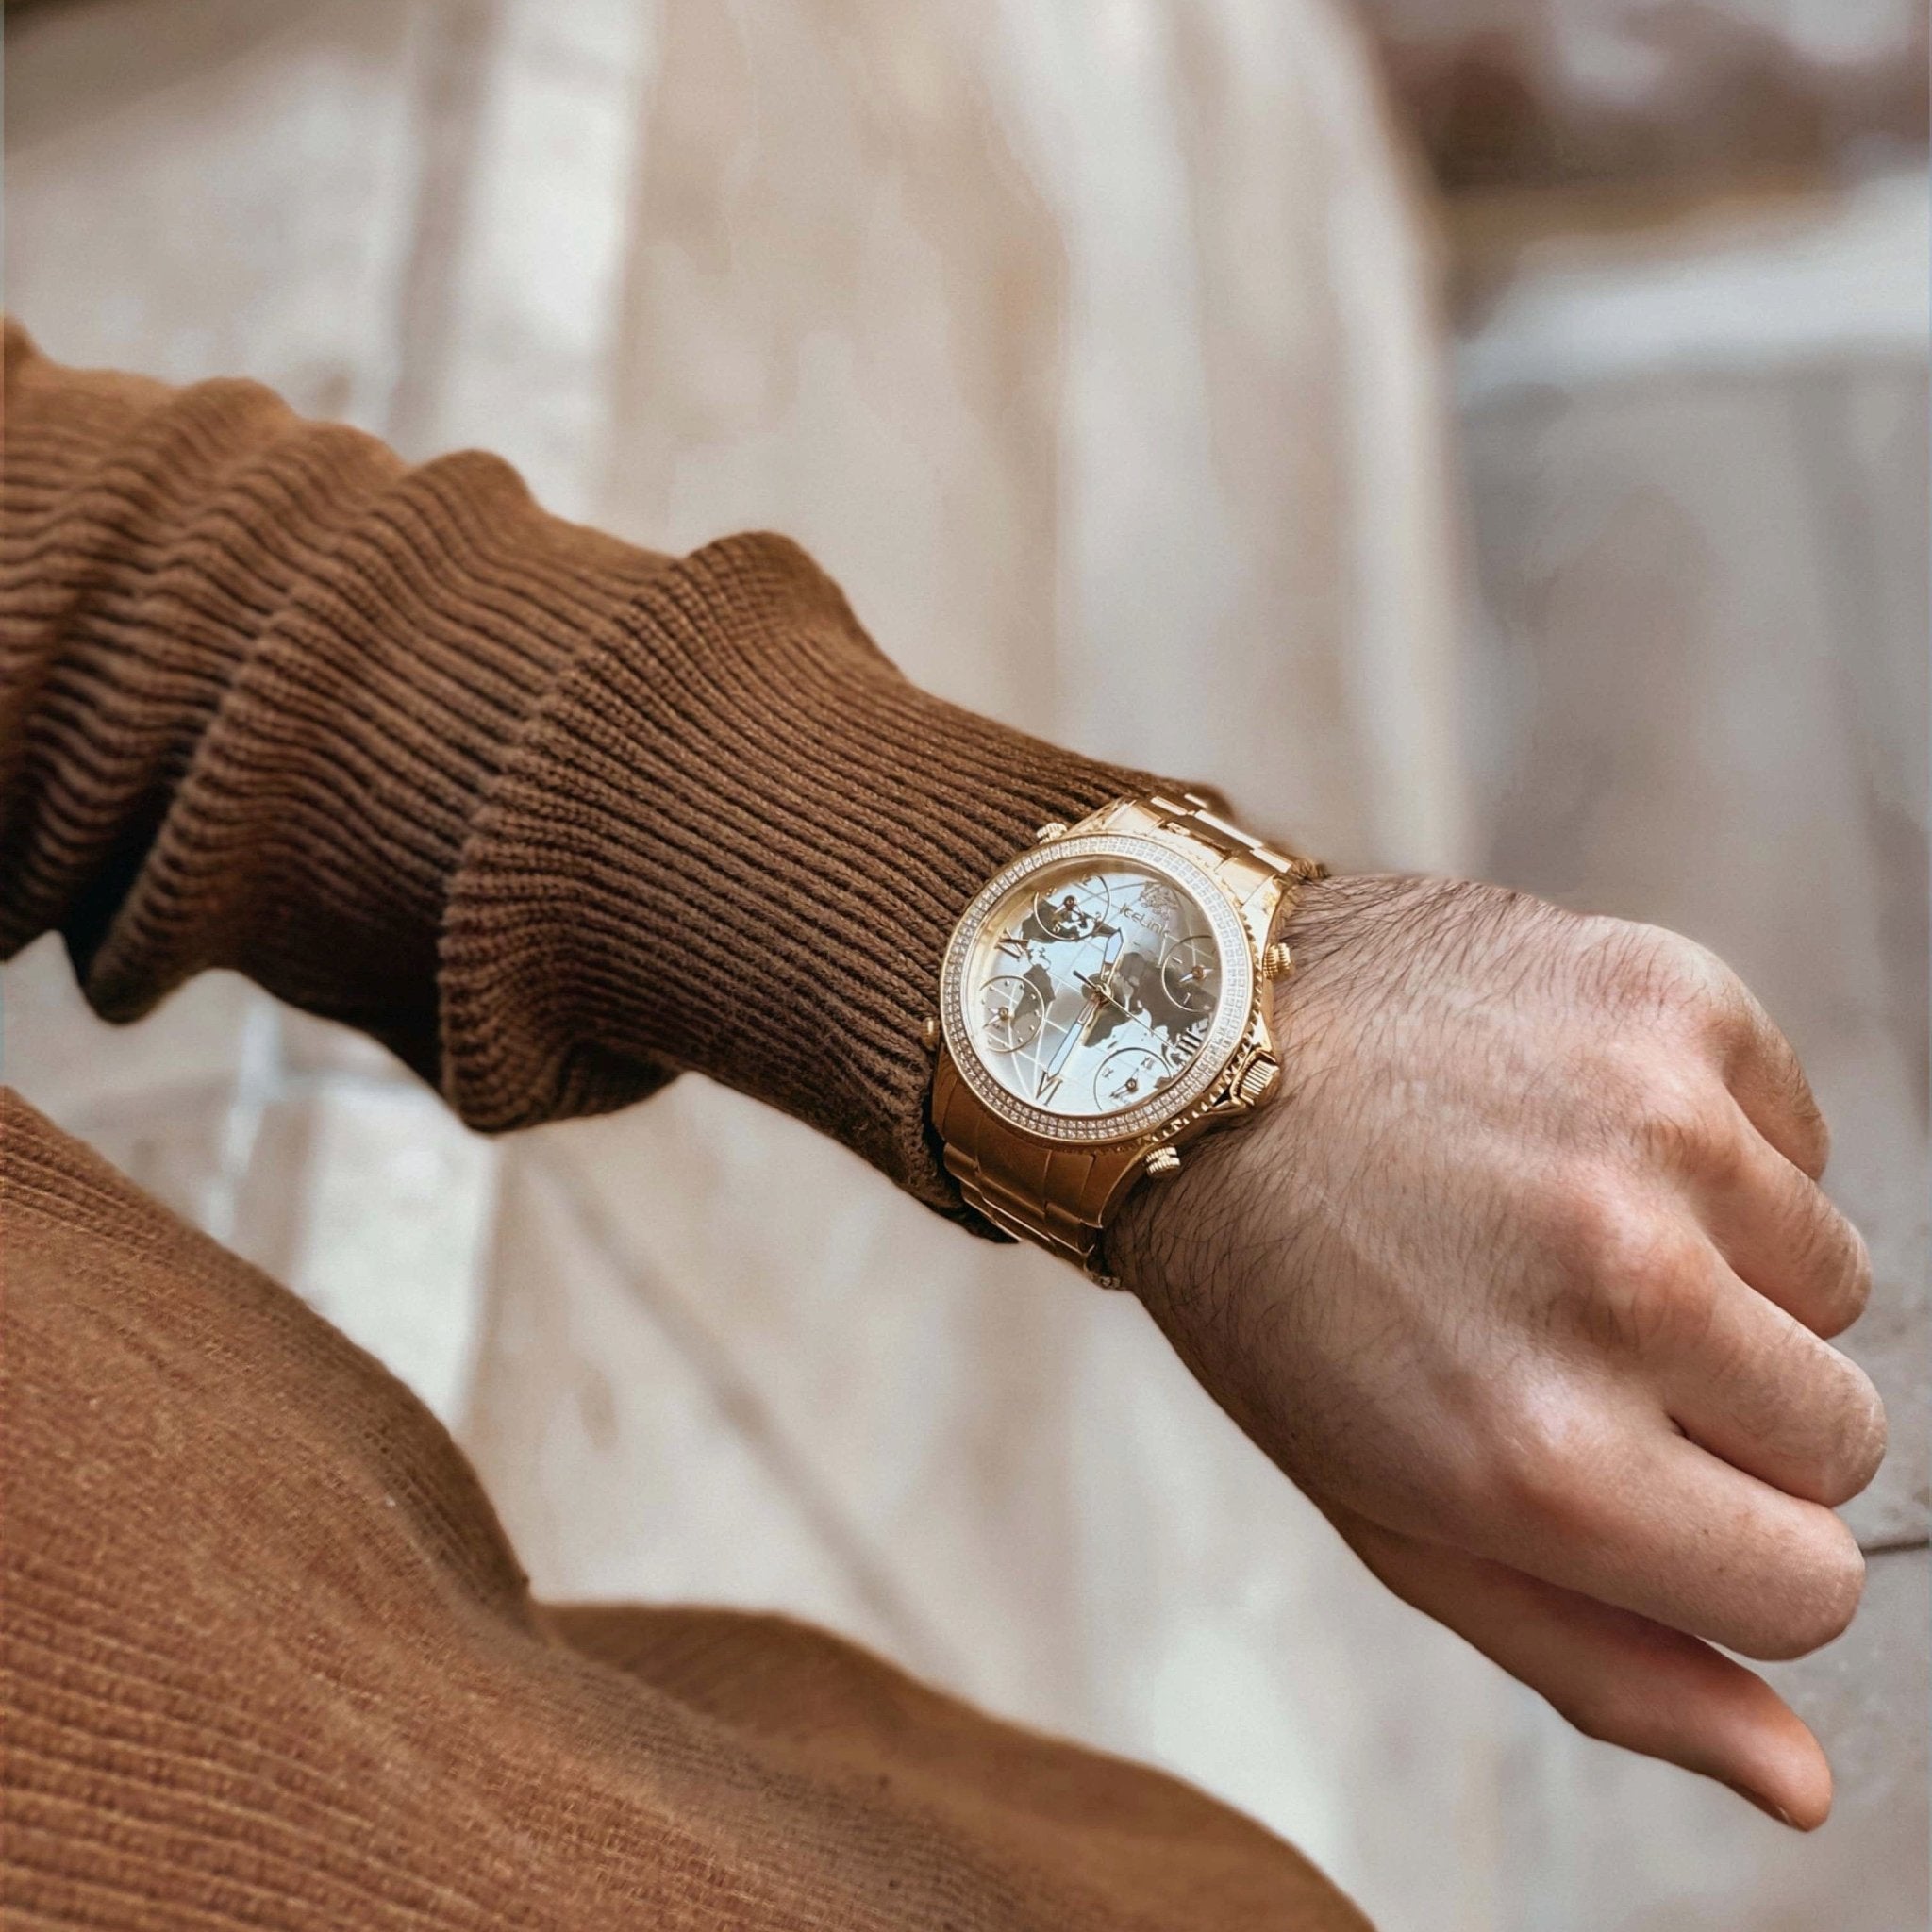 Marco Timber Watch from Mistura Timepieces